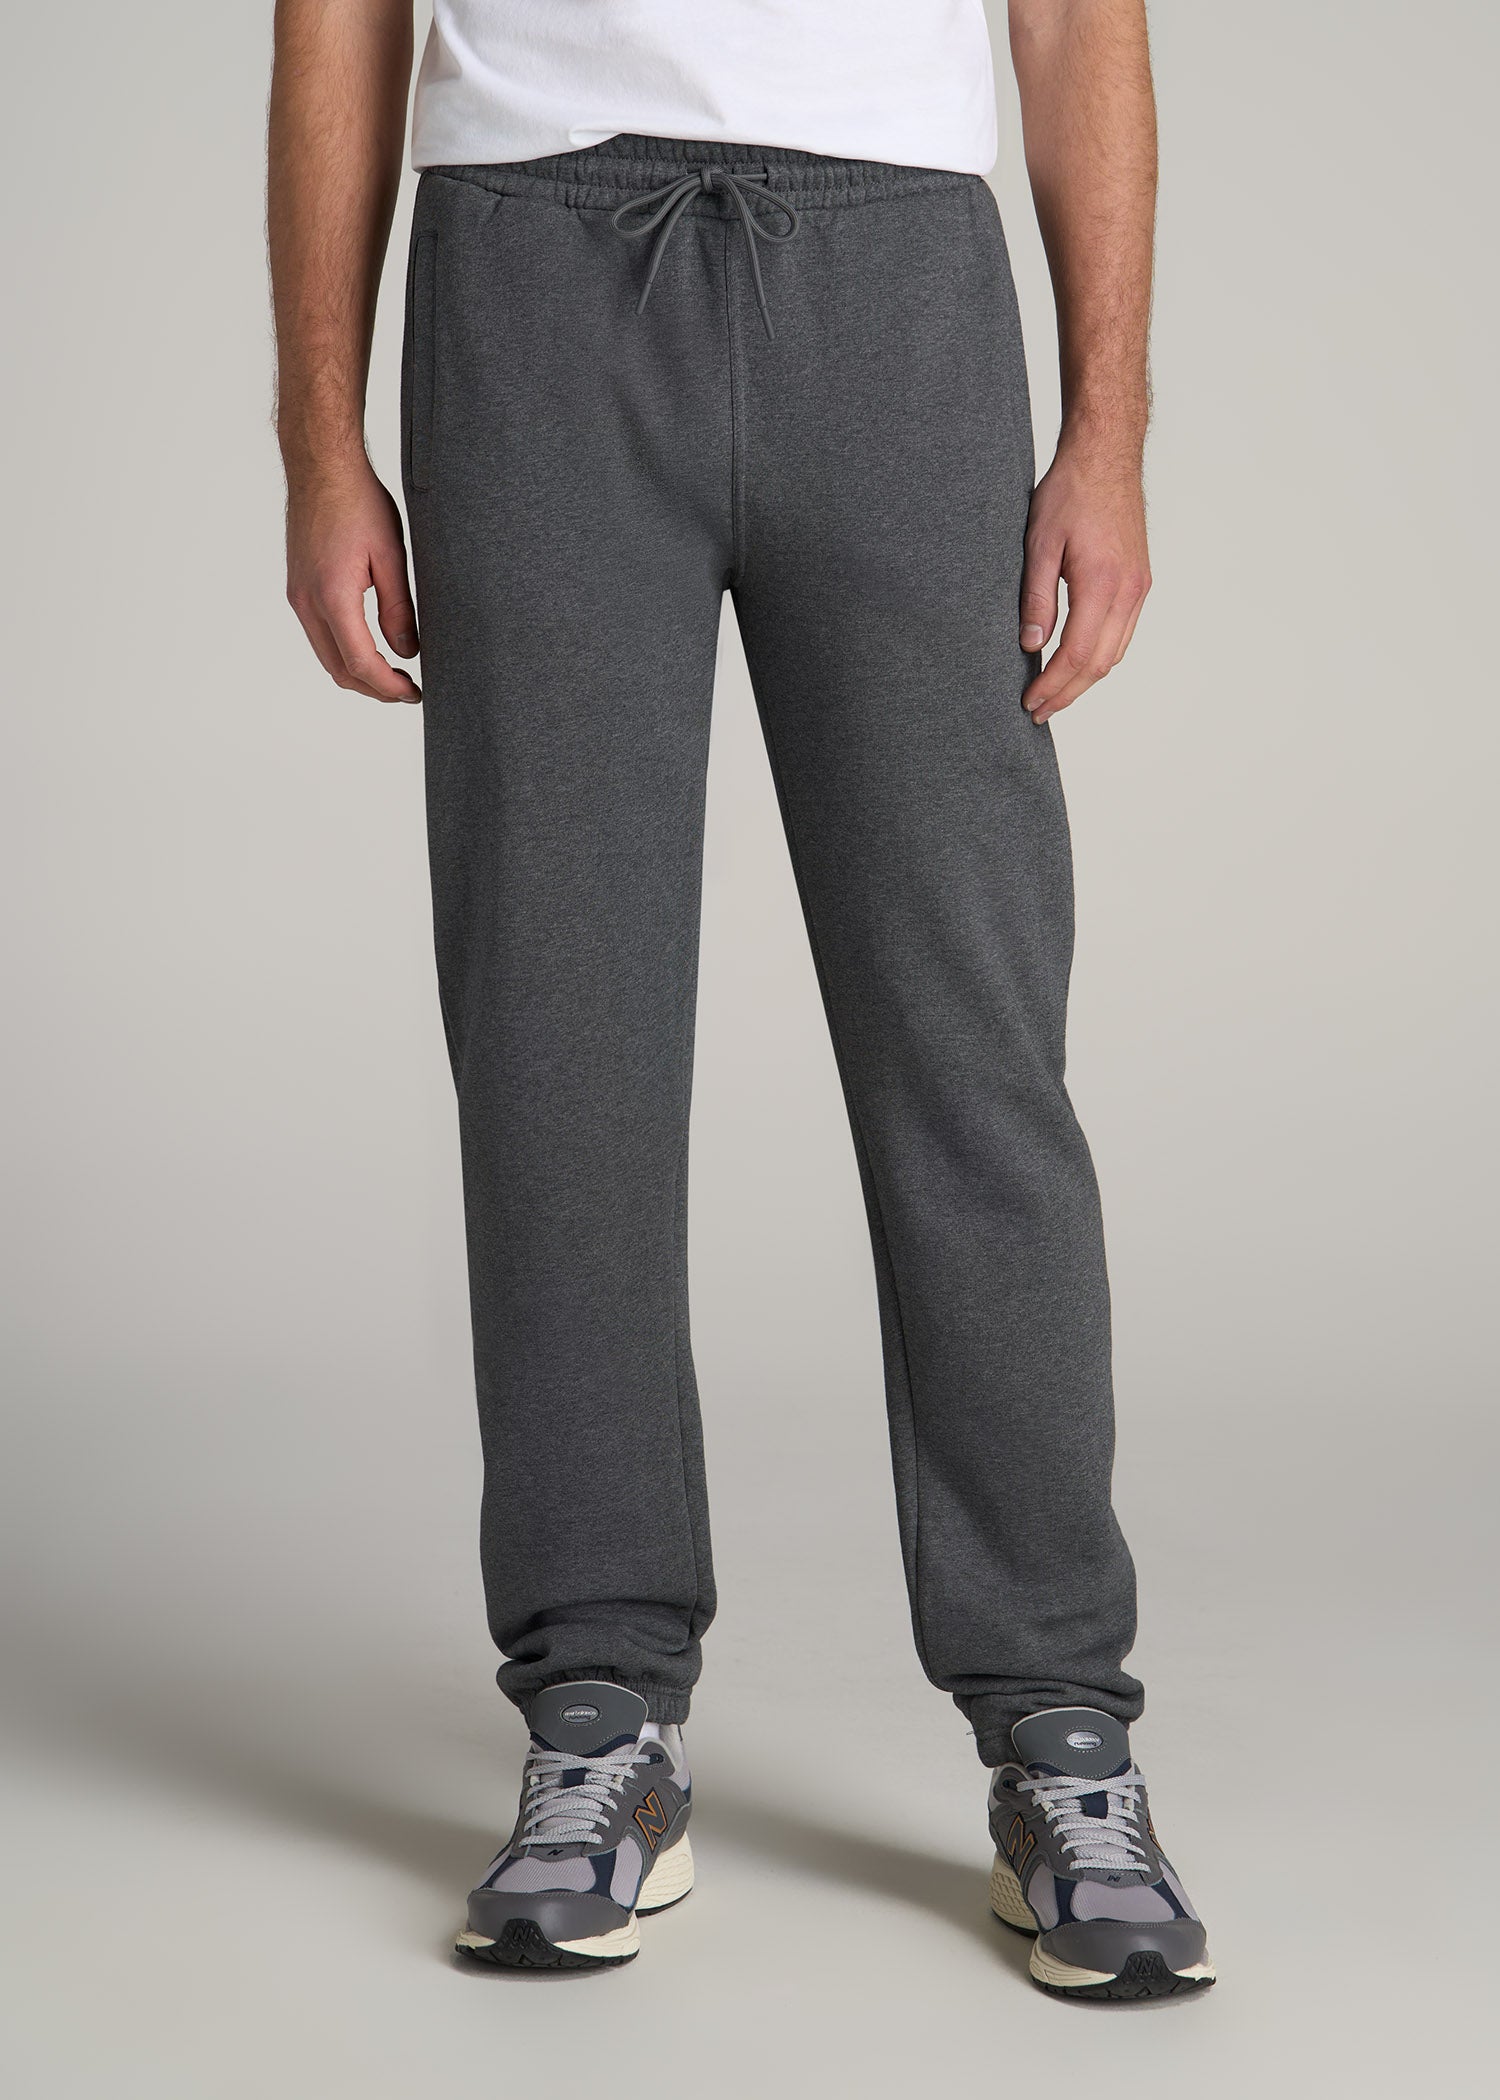 Tall Men's Sweatpants 36 inseam - 8 Options to Get you Started